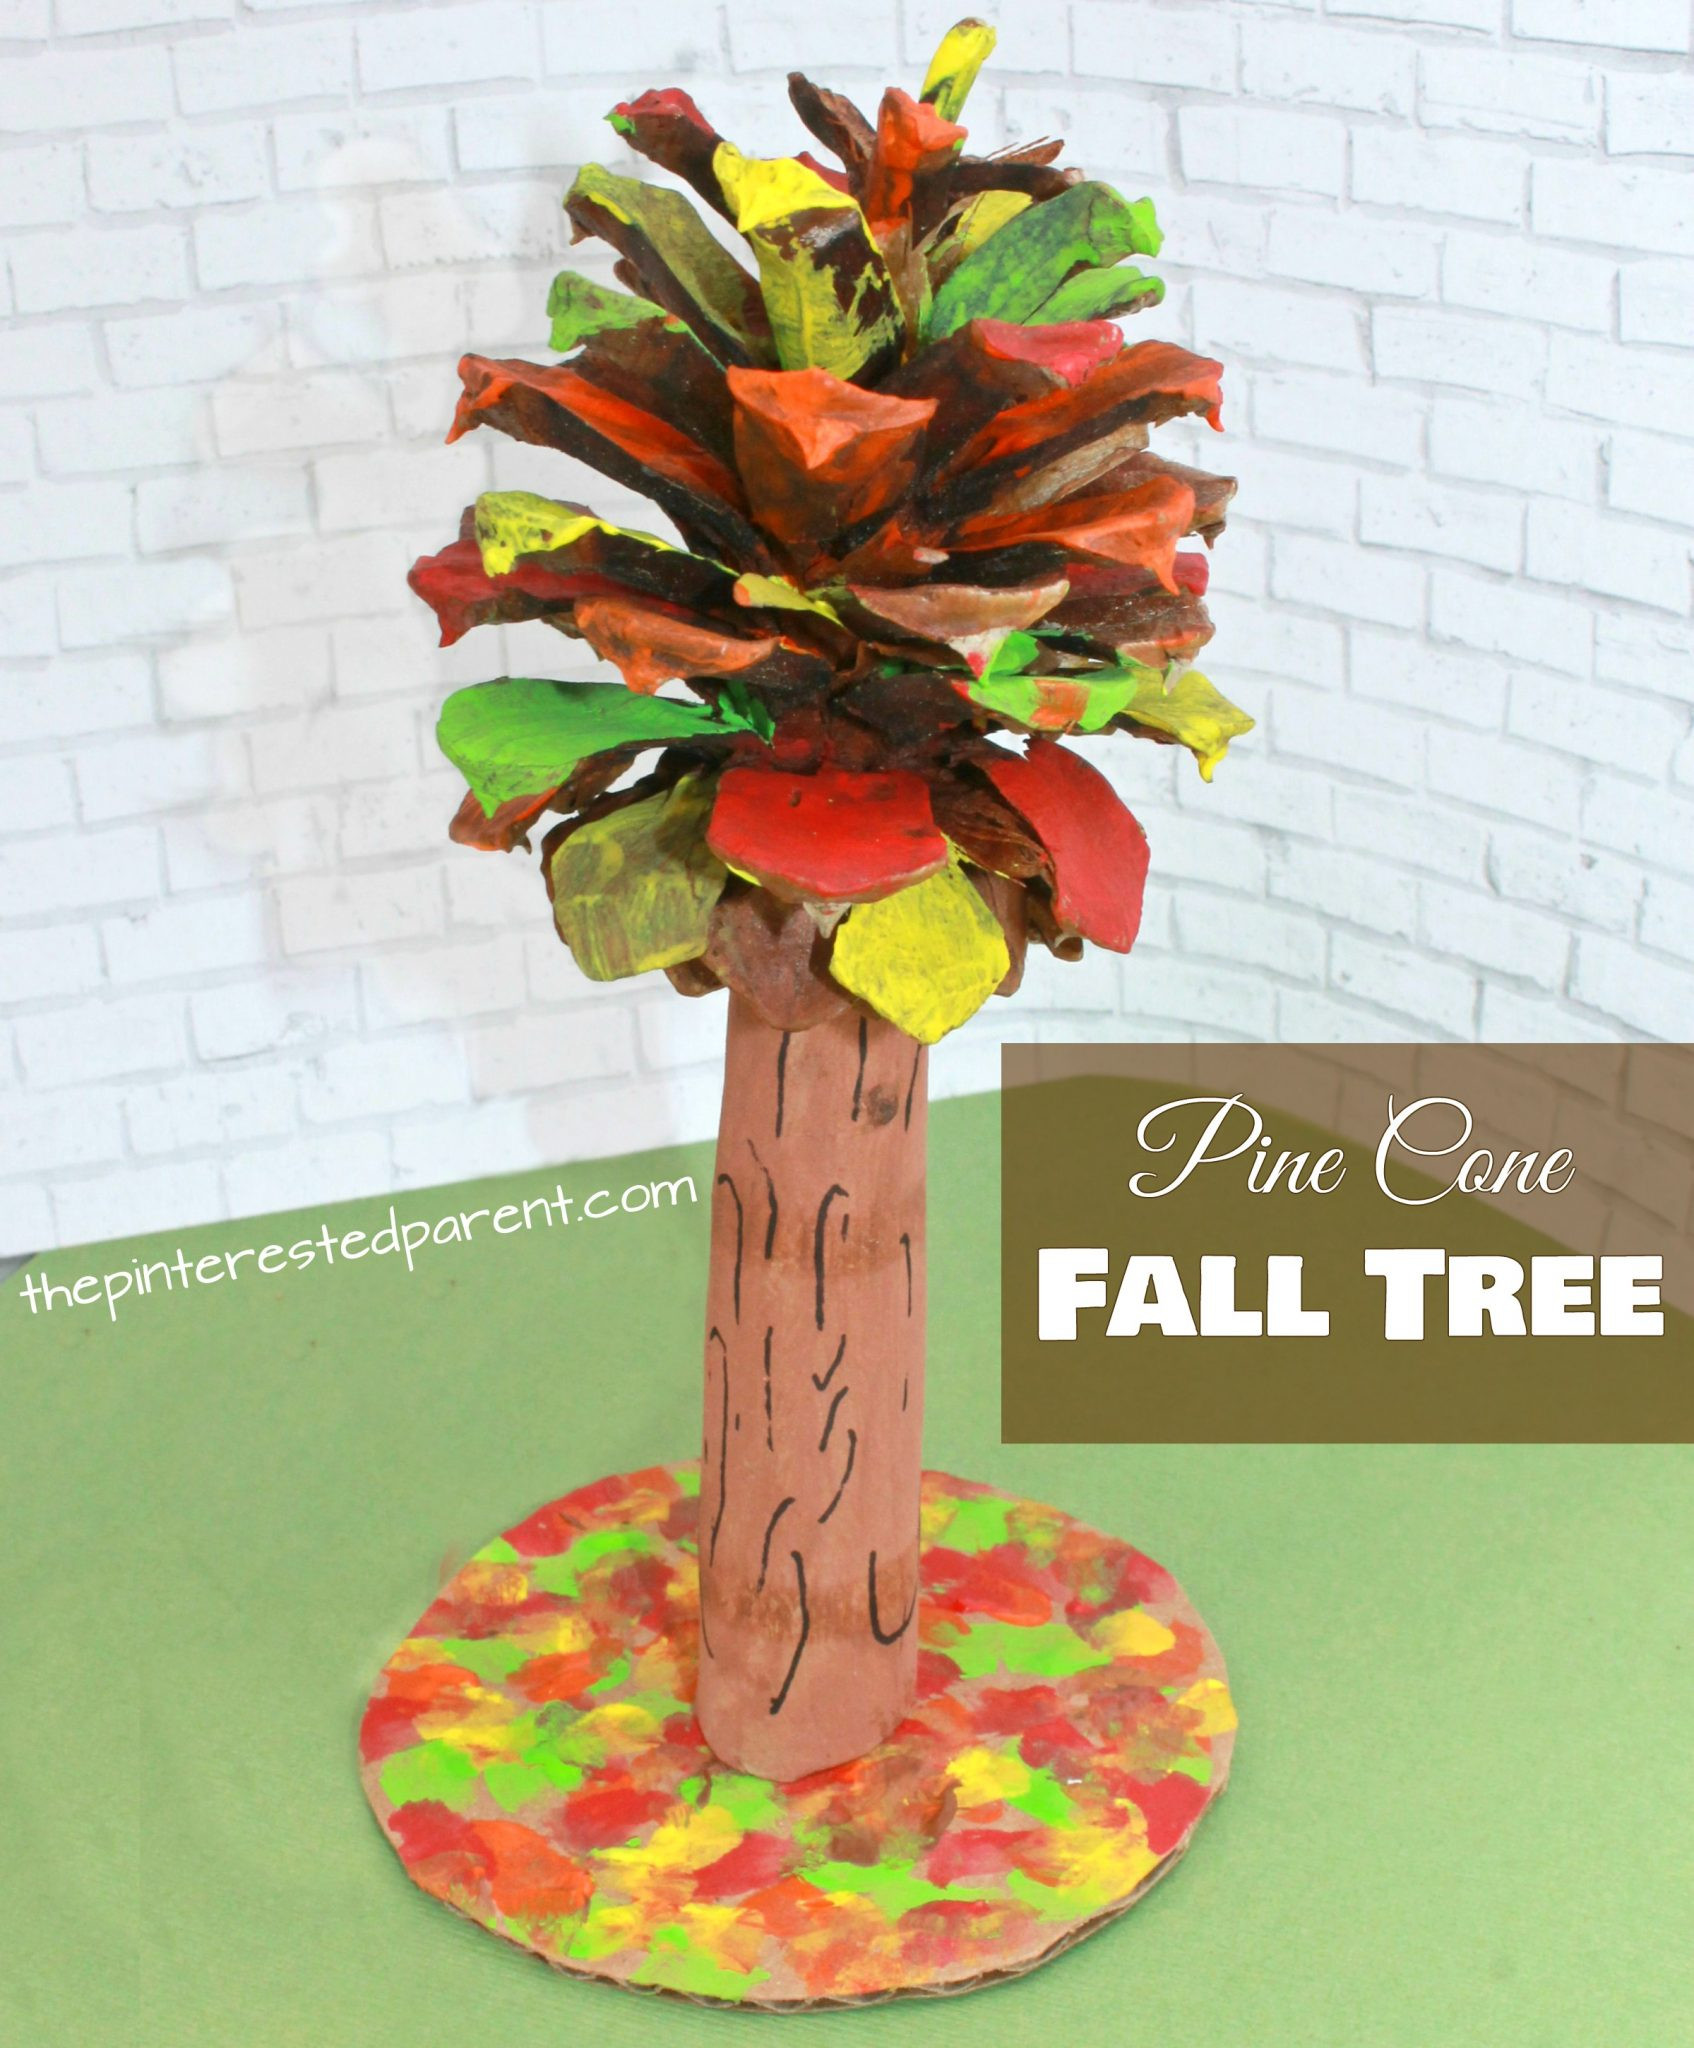 Autumn Arts And Craft
 Pine Cone Fall Tree Craft – The Pinterested Parent